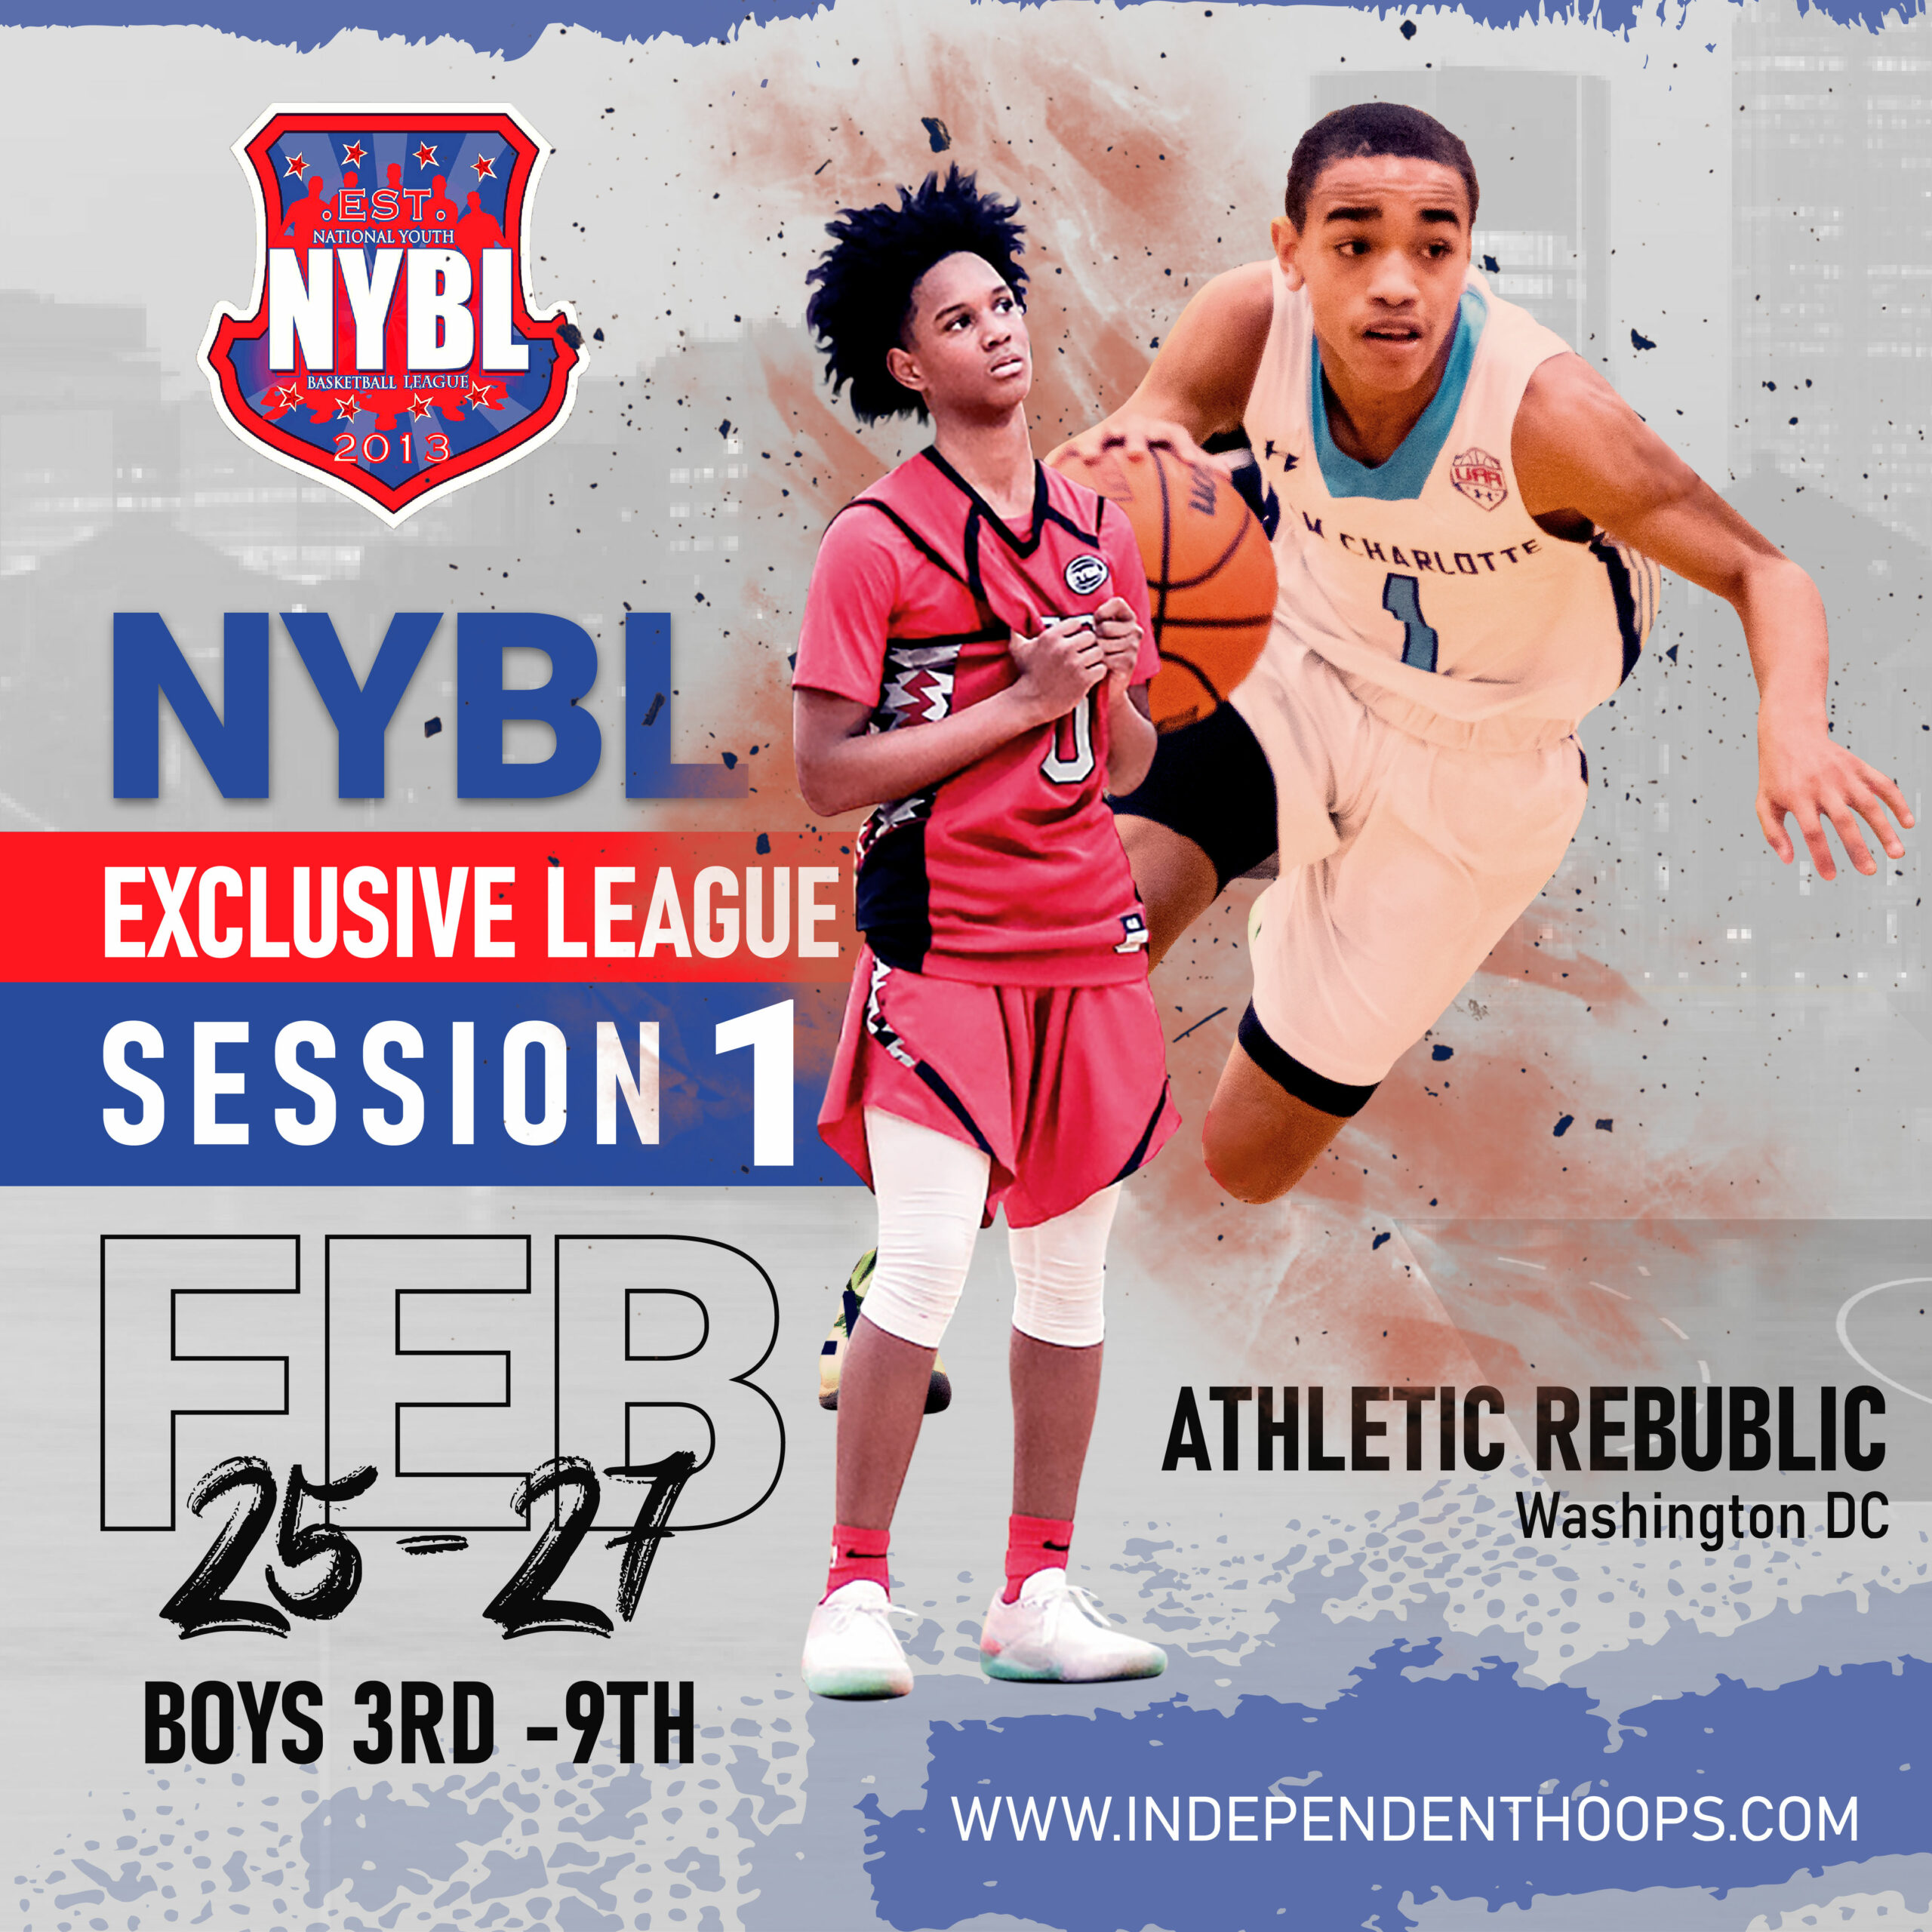 NYBL Exclusive Run 2 Images-01